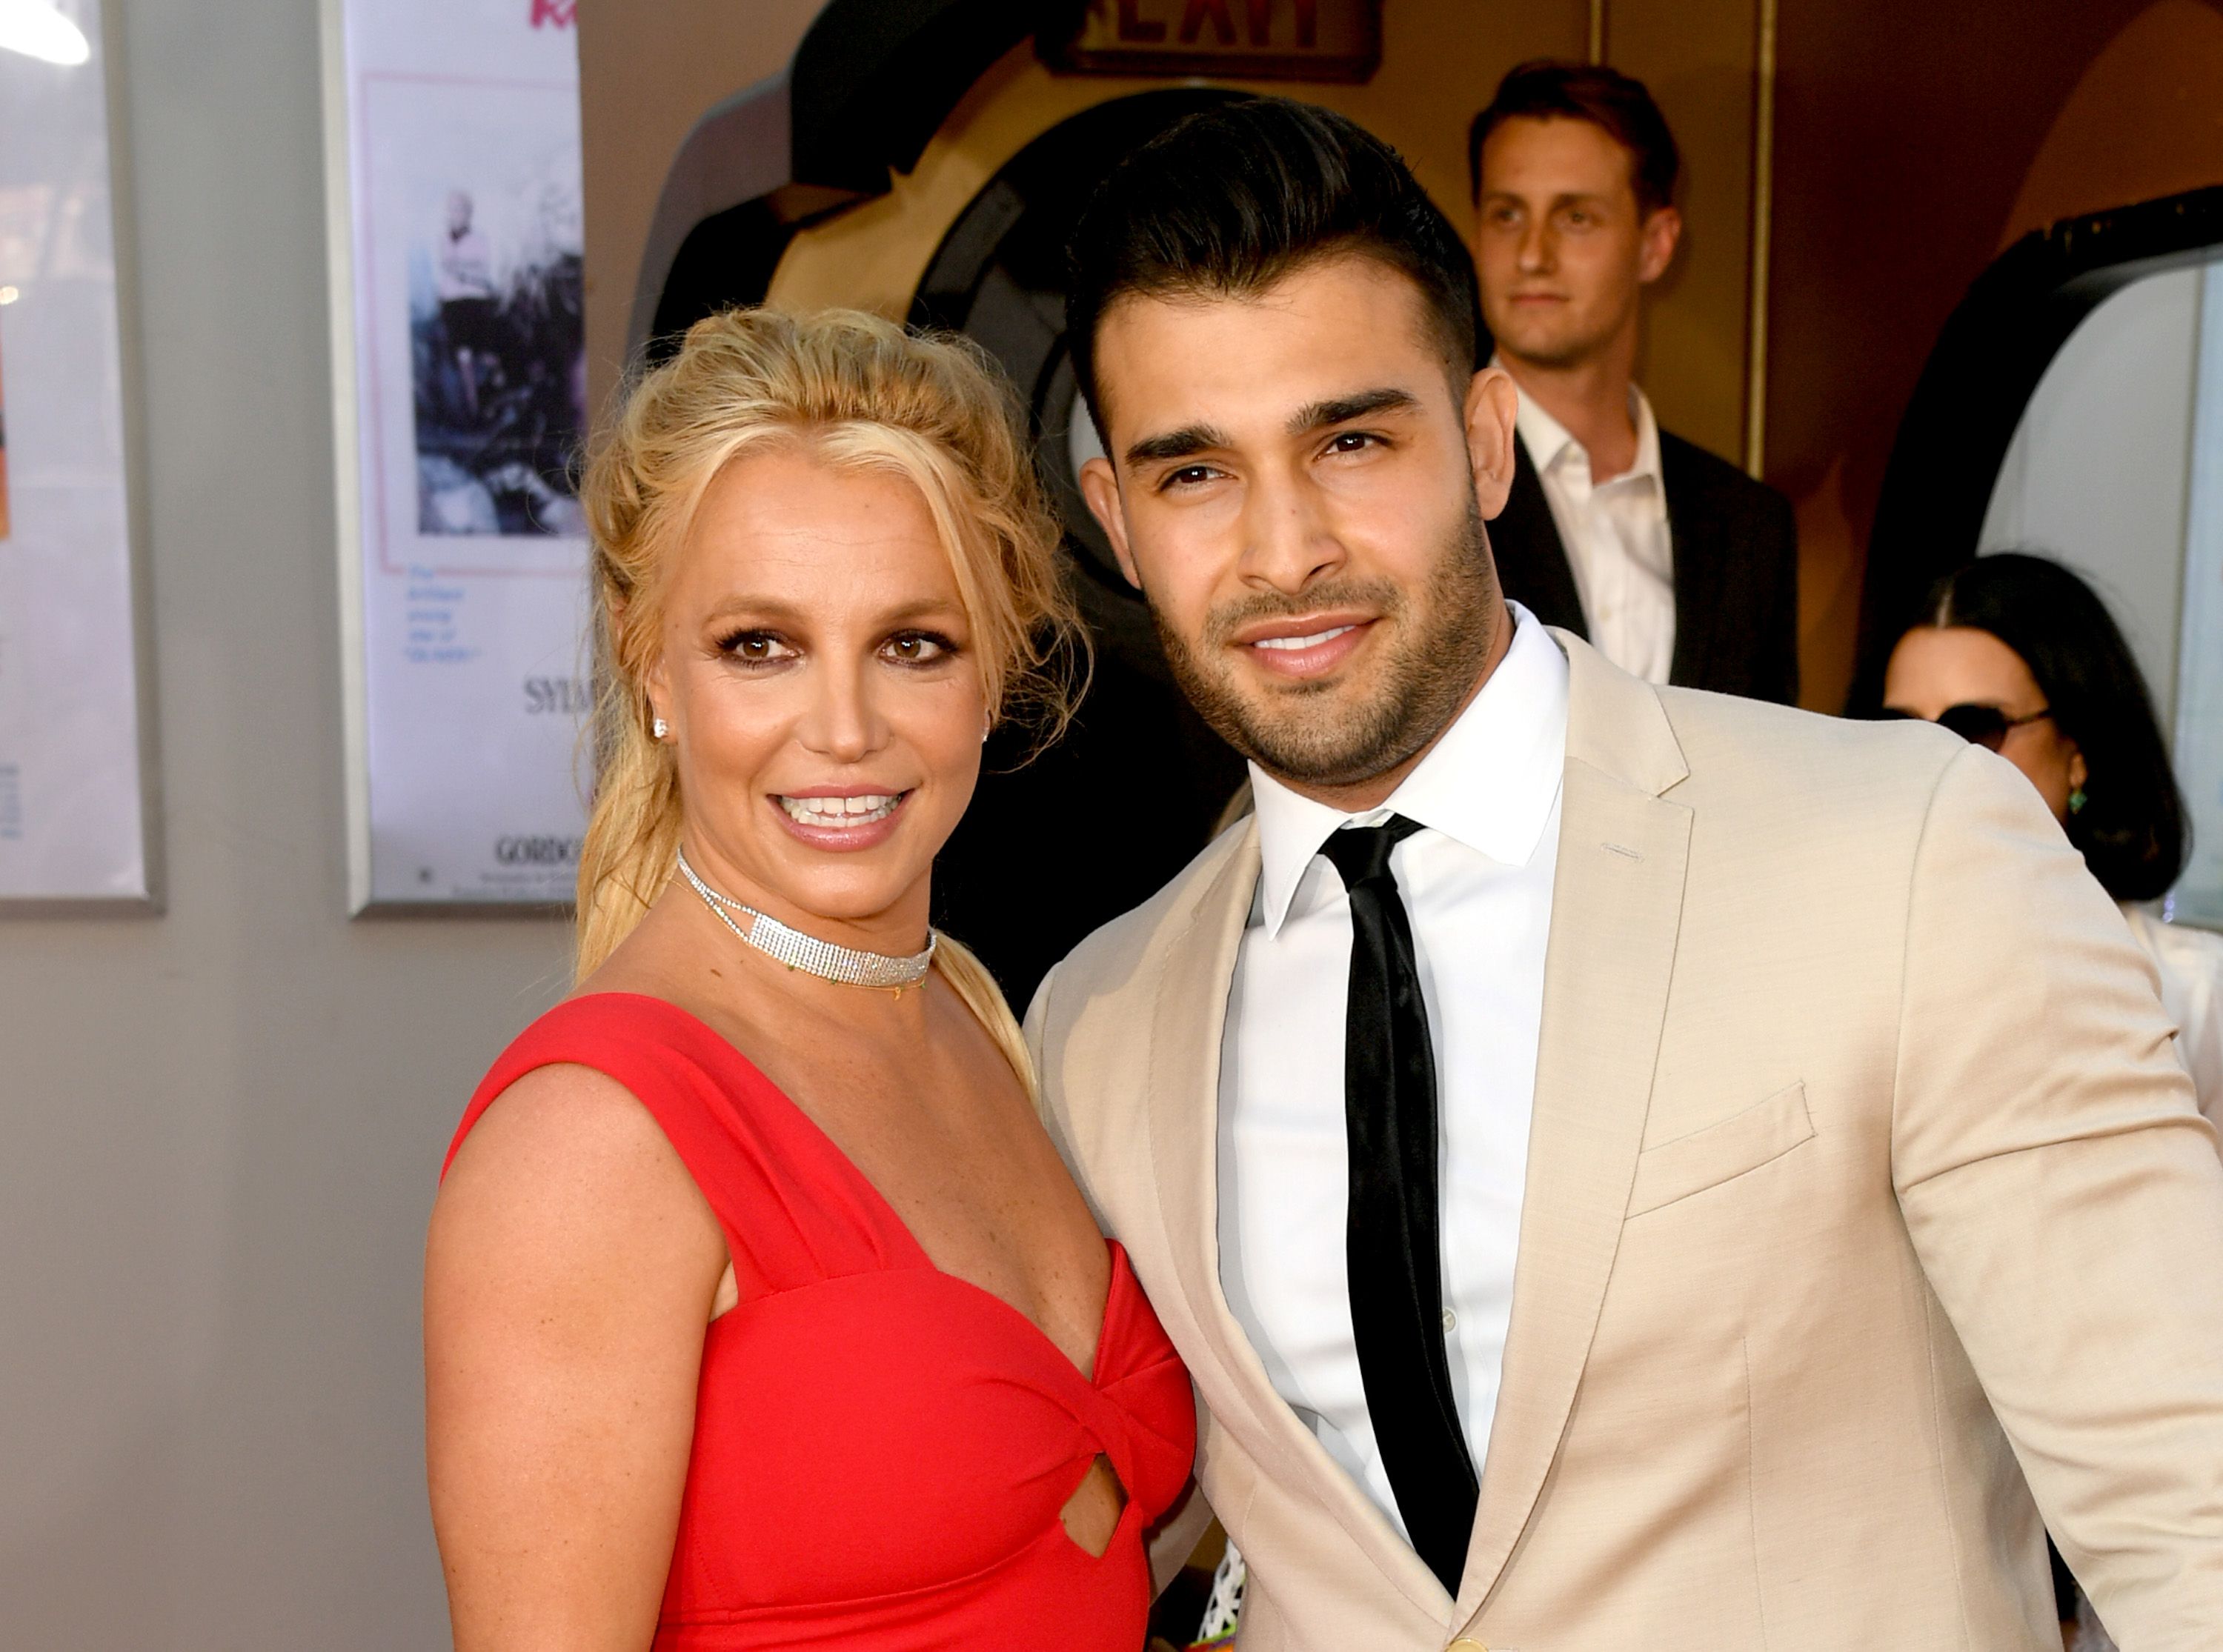 Britney Spears and Sam Asghari at the premiere of Sony Pictures' "One Upon A Time...In Hollywood" at the Chinese Theatre on July 22, 2019 | Source: Getty Images